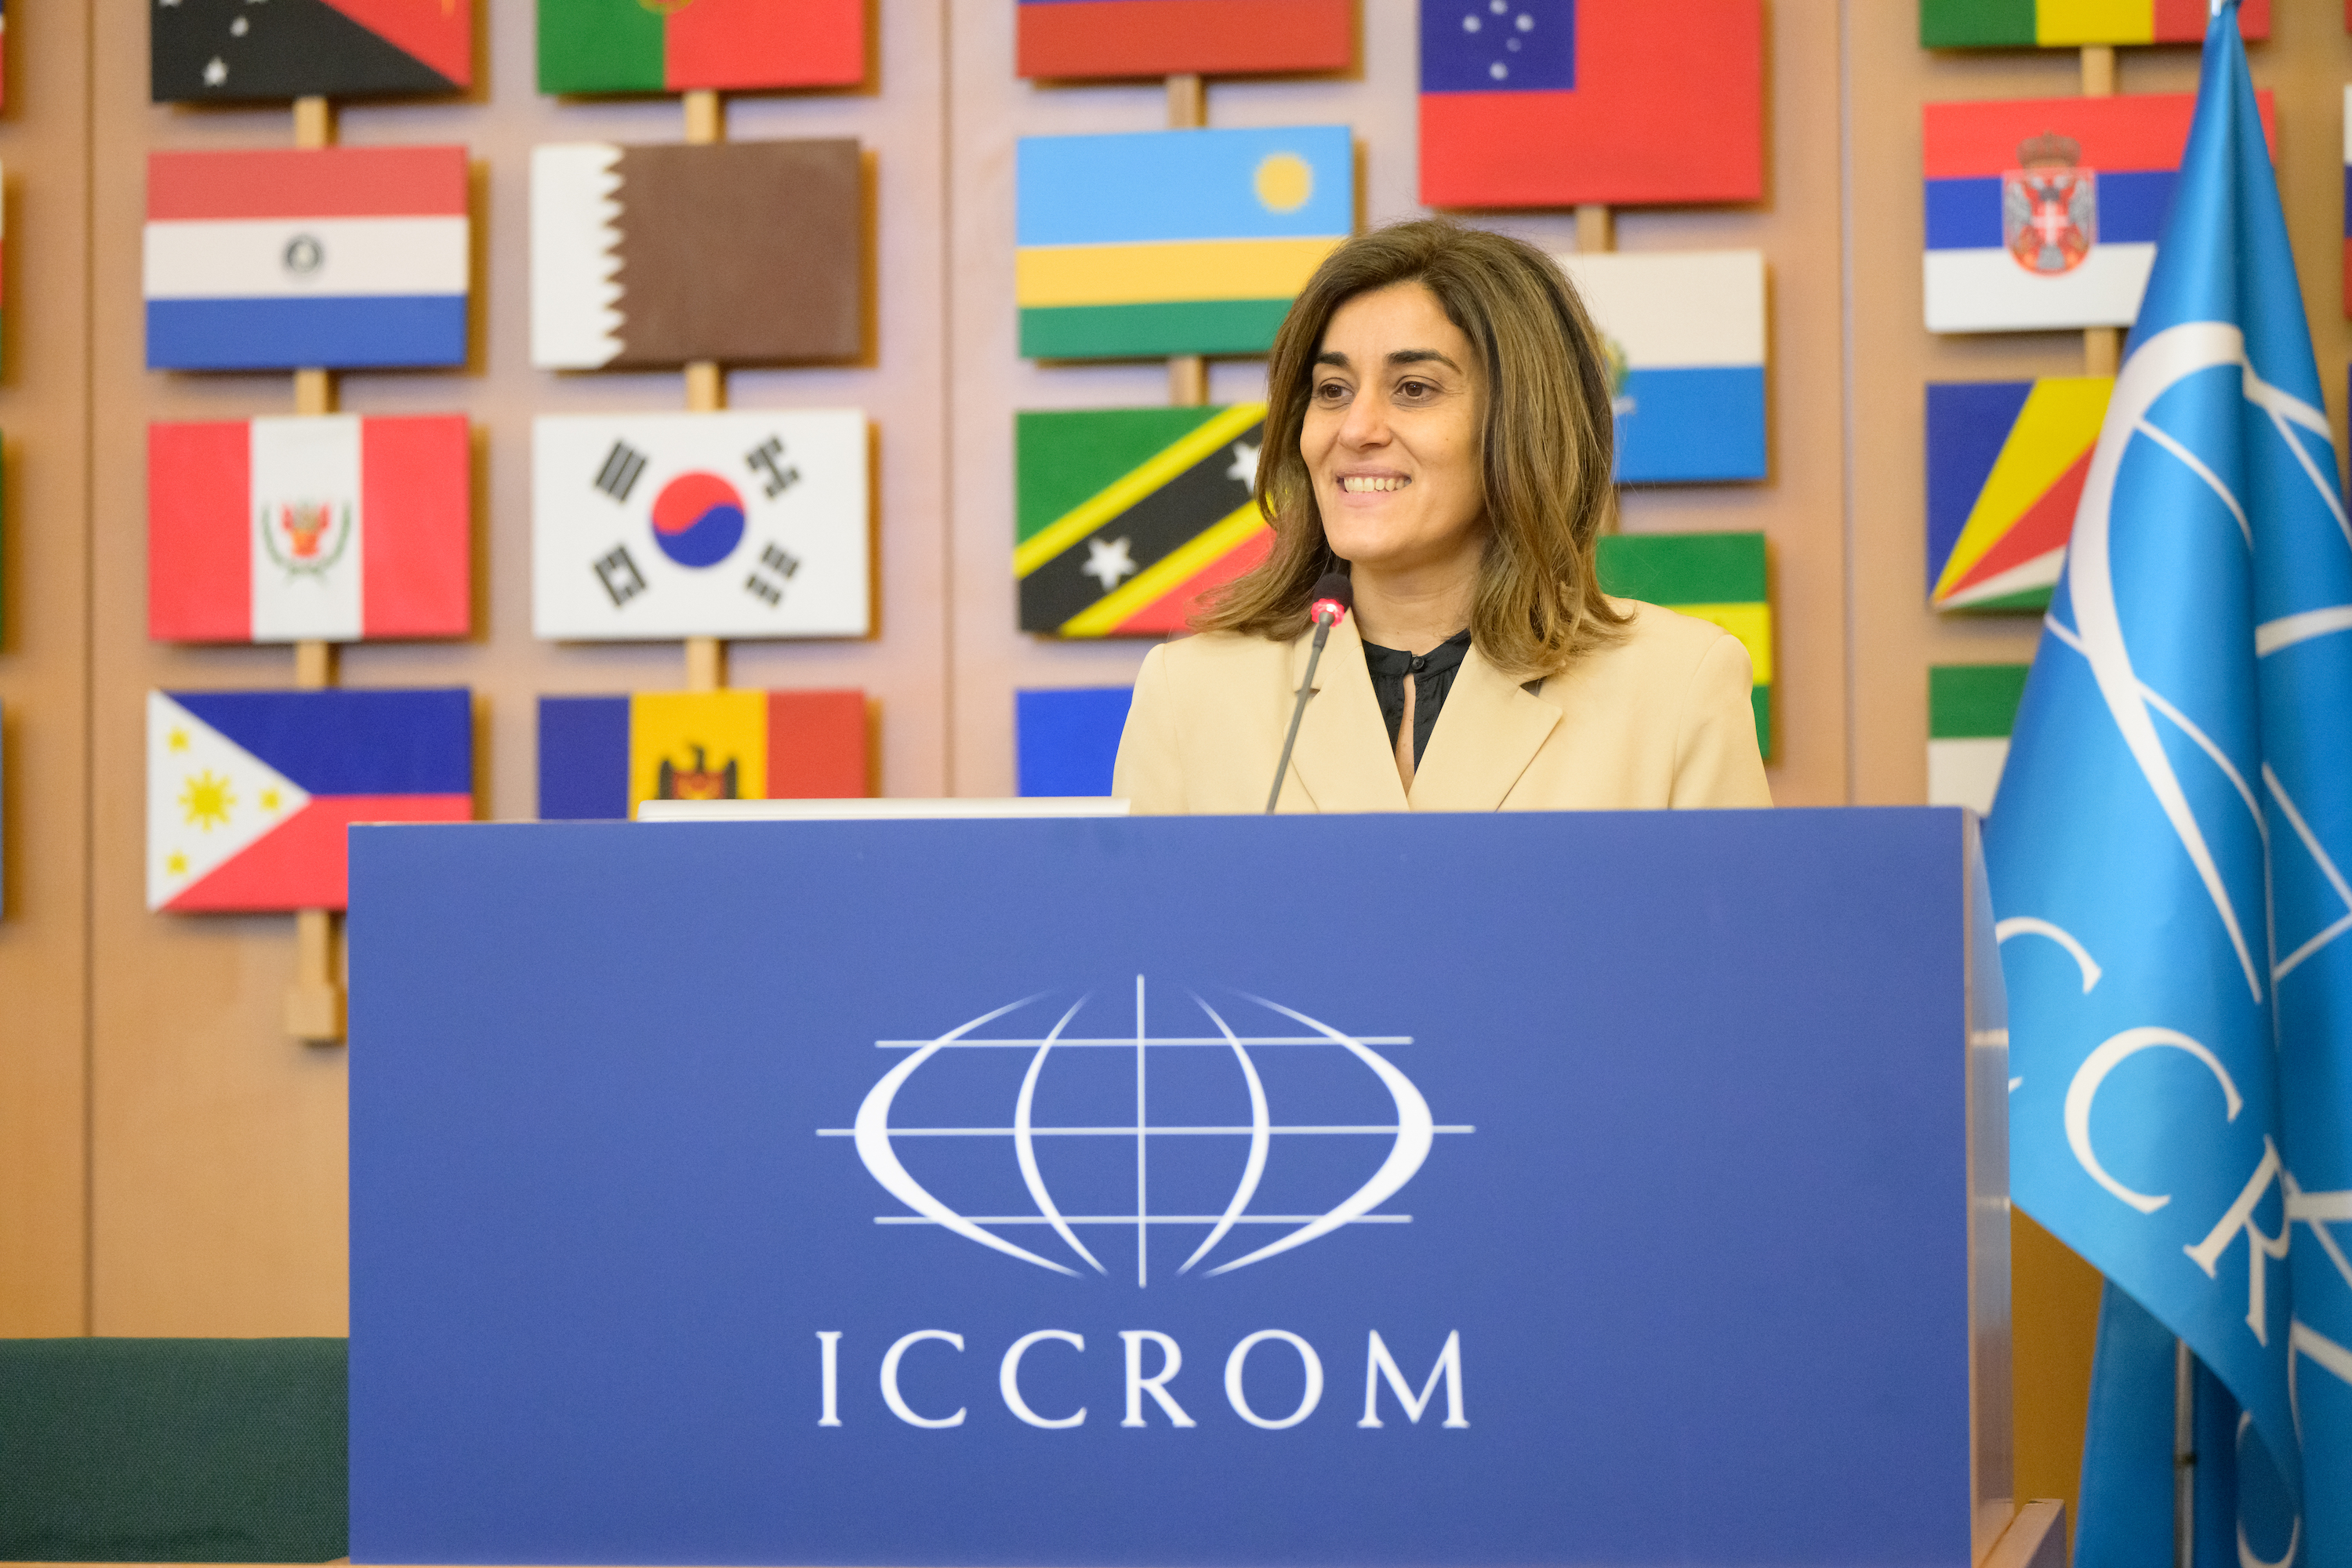 Welcoming Ms Aruna Francesca Maria Gujral as the new Director-General of ICCROM    